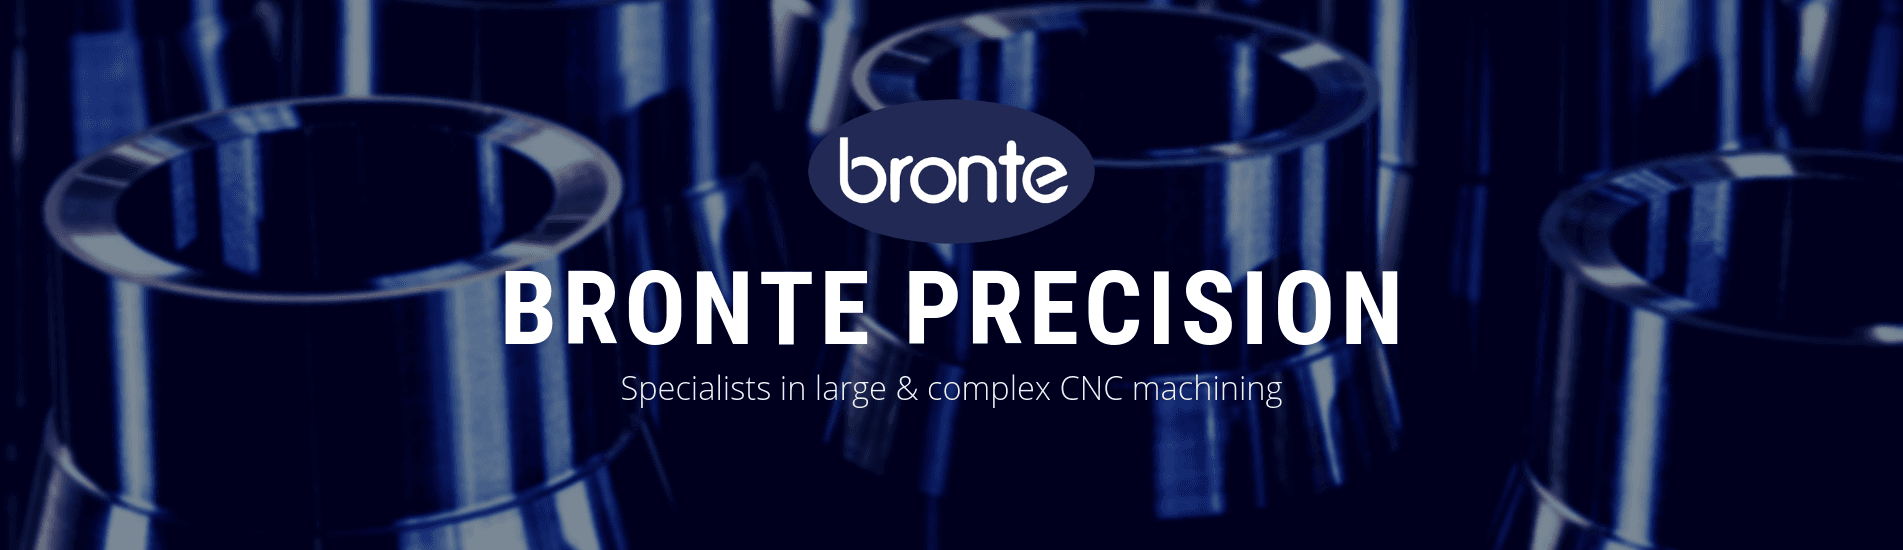 Stainless Steel Precision Nozzle Manufacture - Bronte